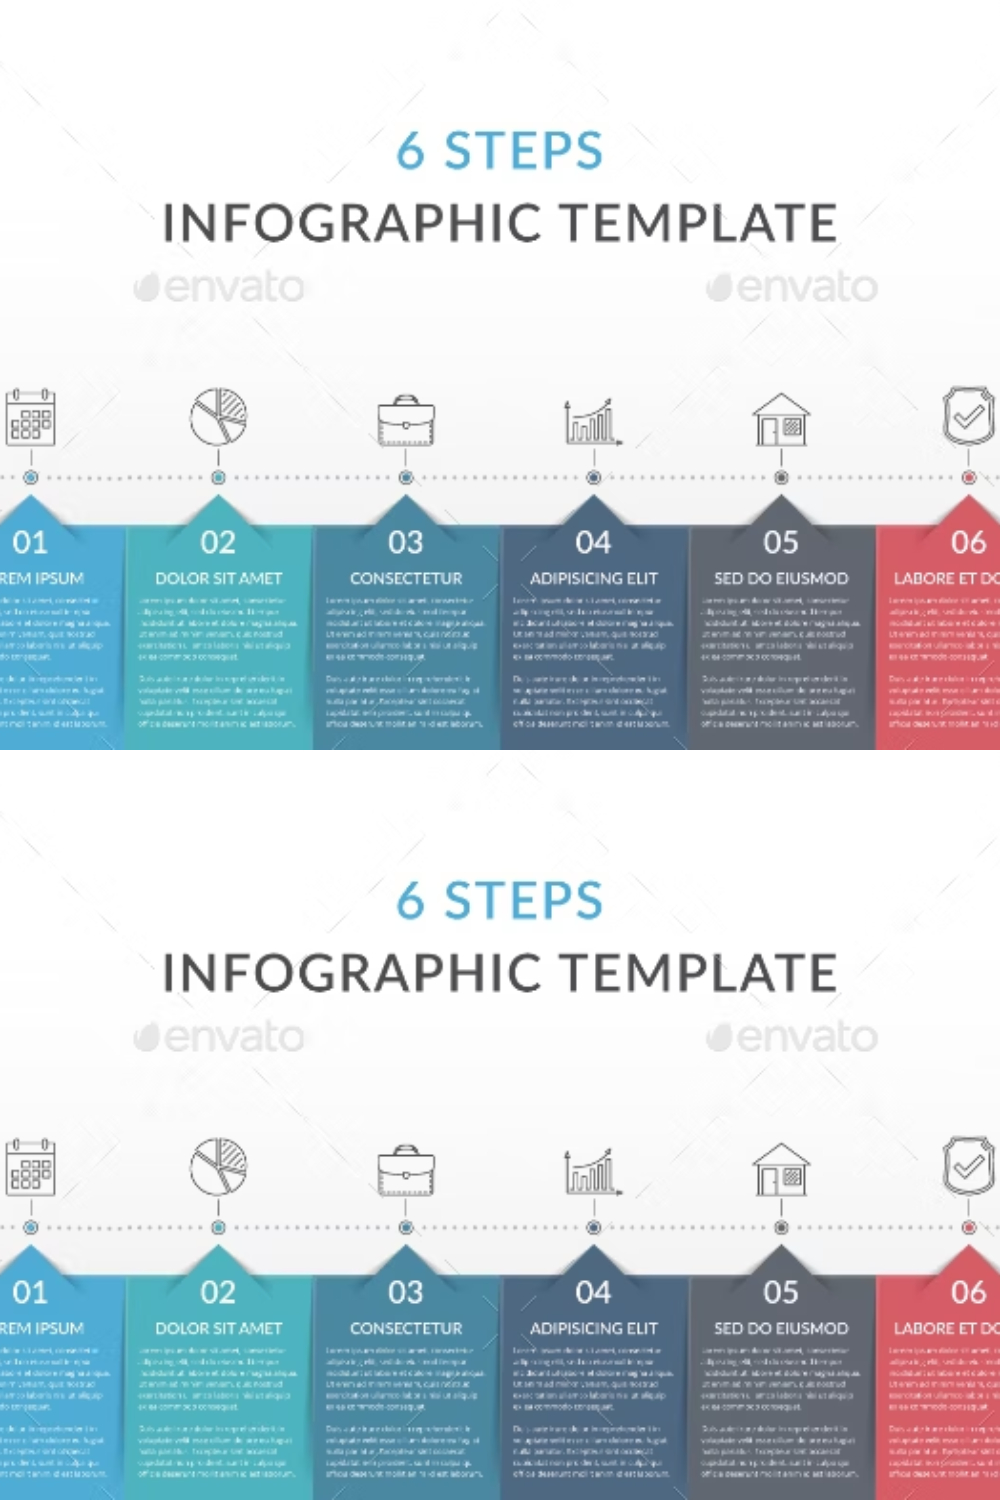 6 Steps - Infographic Template Pinterest Cover.